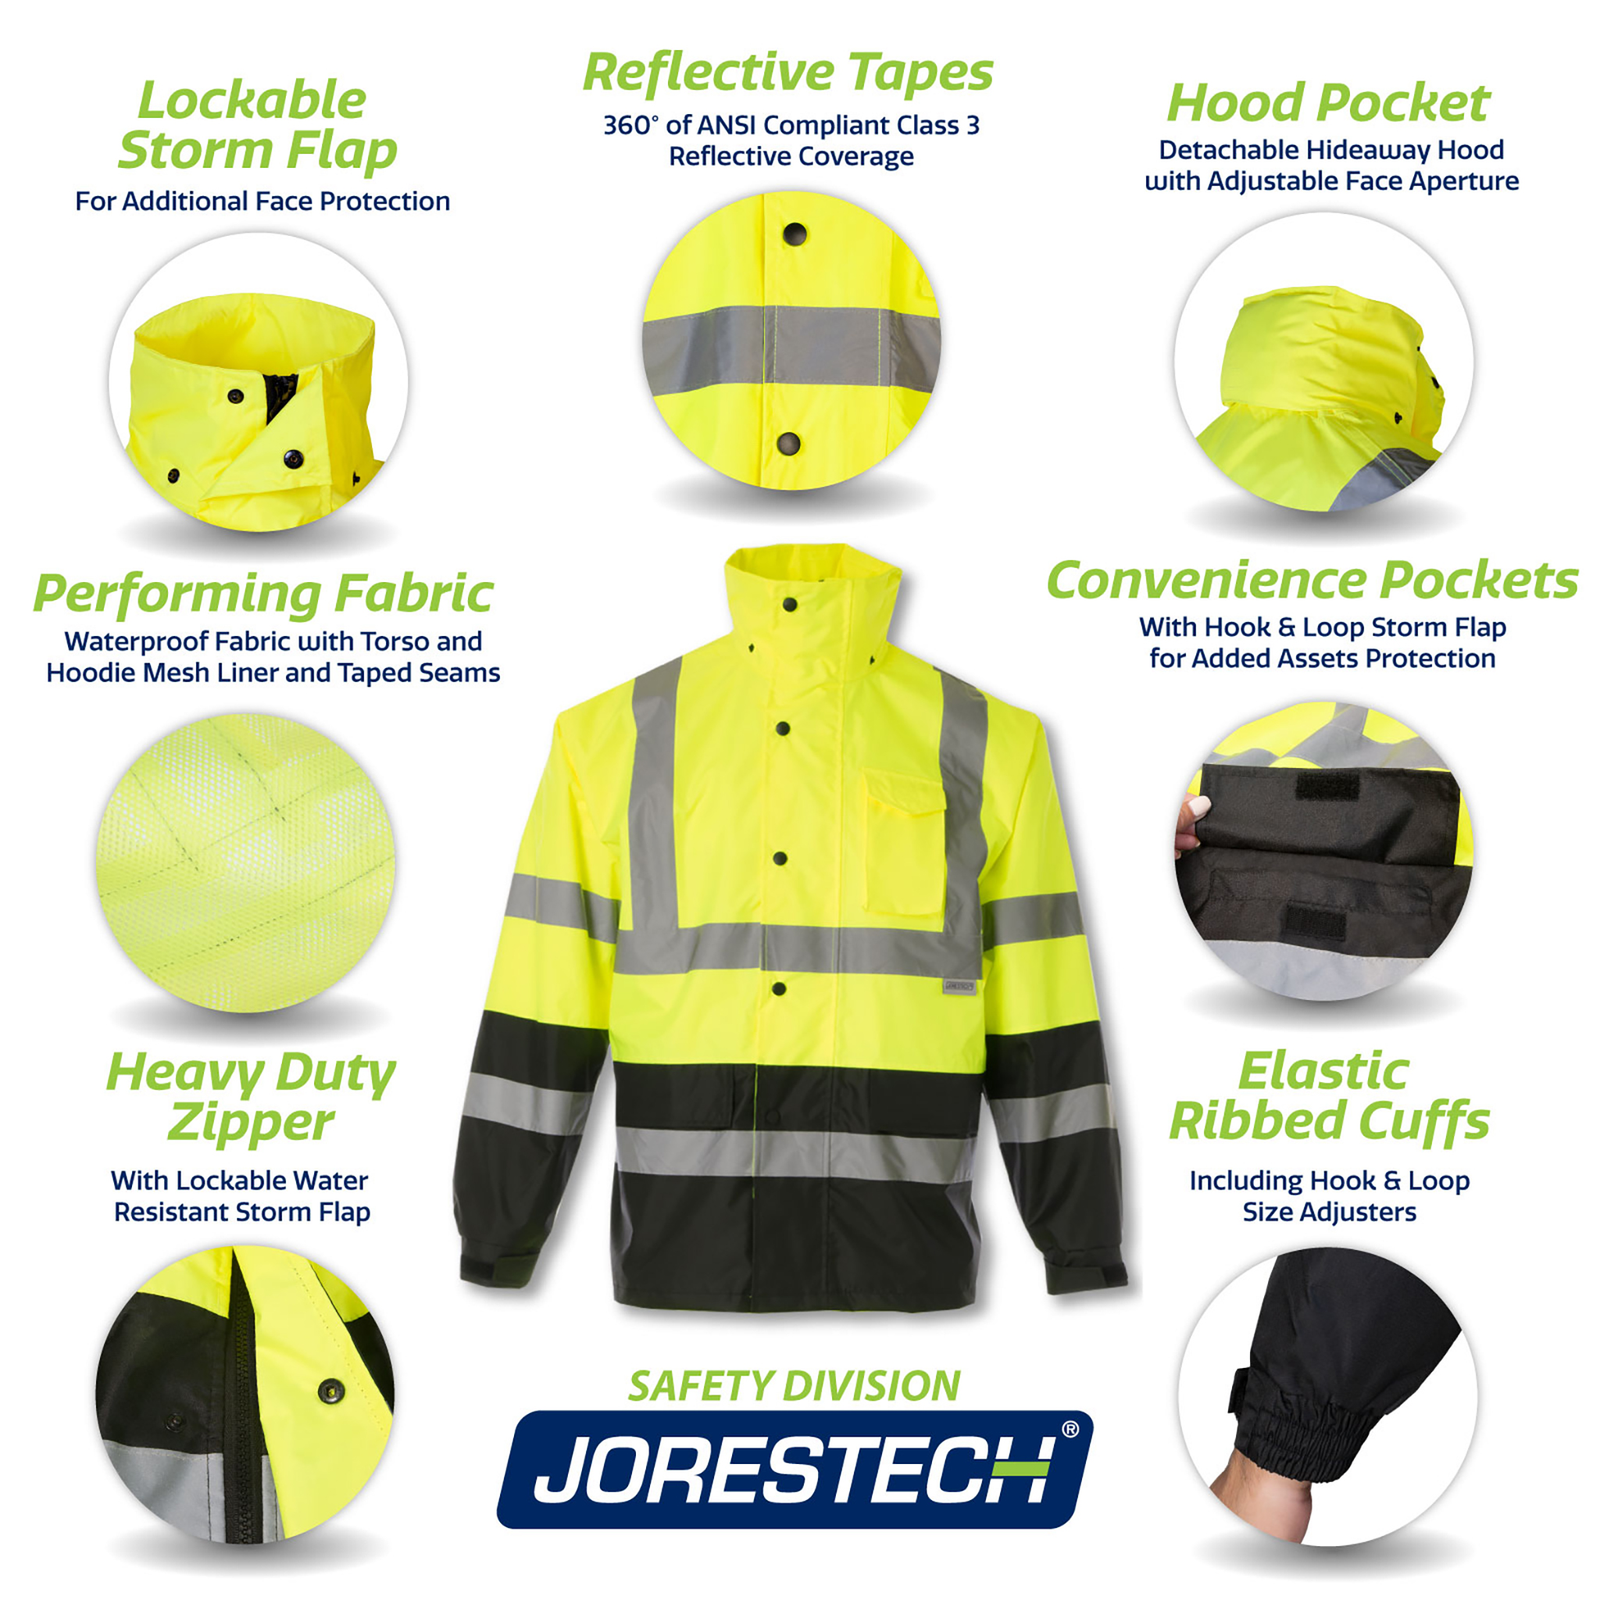 Image of the yellow/lime and black rain jacket pus 7 call outs. Call outs read: Lockable storm flap for face protection. Reflective tapes ANSI compliant class 3. Hood pocket detachable and hide away hood. Performing fabric, waterproof, mesh liner and taped seams. Multiple convenience pockets. Heavy duty zipper with additional storm flap. Elastic ribbed cuffs with hook and loop strap